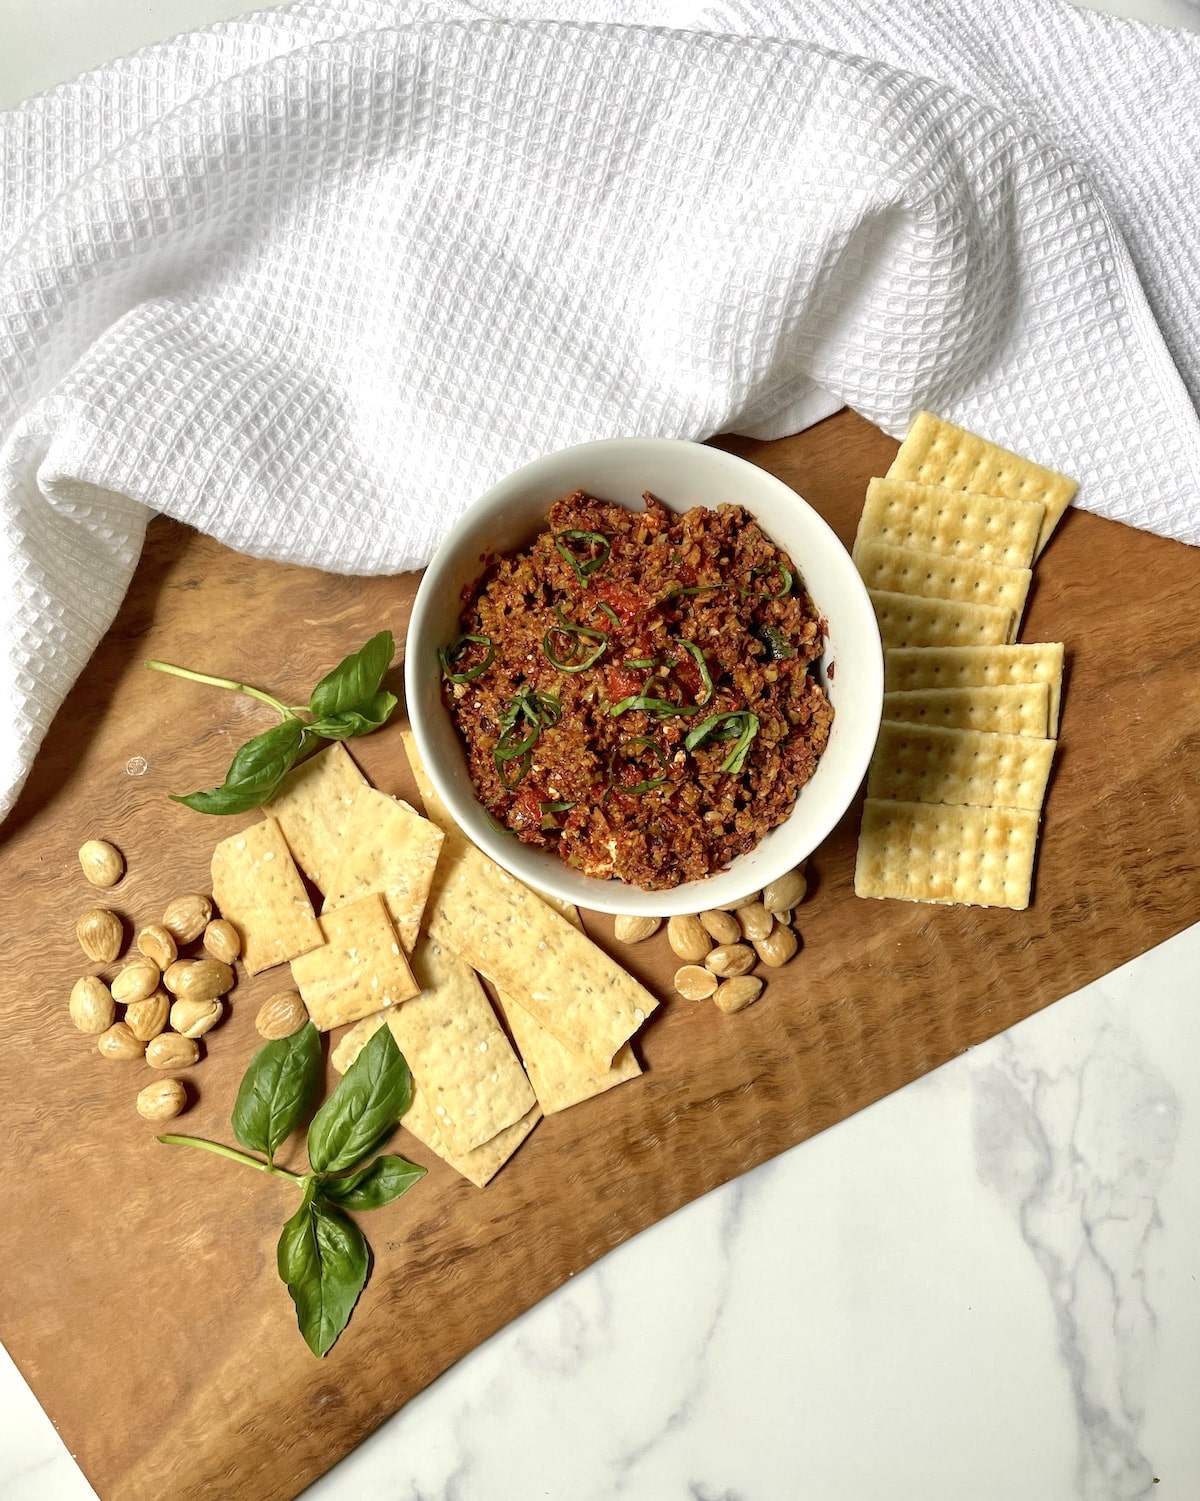 Black olive tapenade in a white bowl with crackers, nuts , and basil leaves.